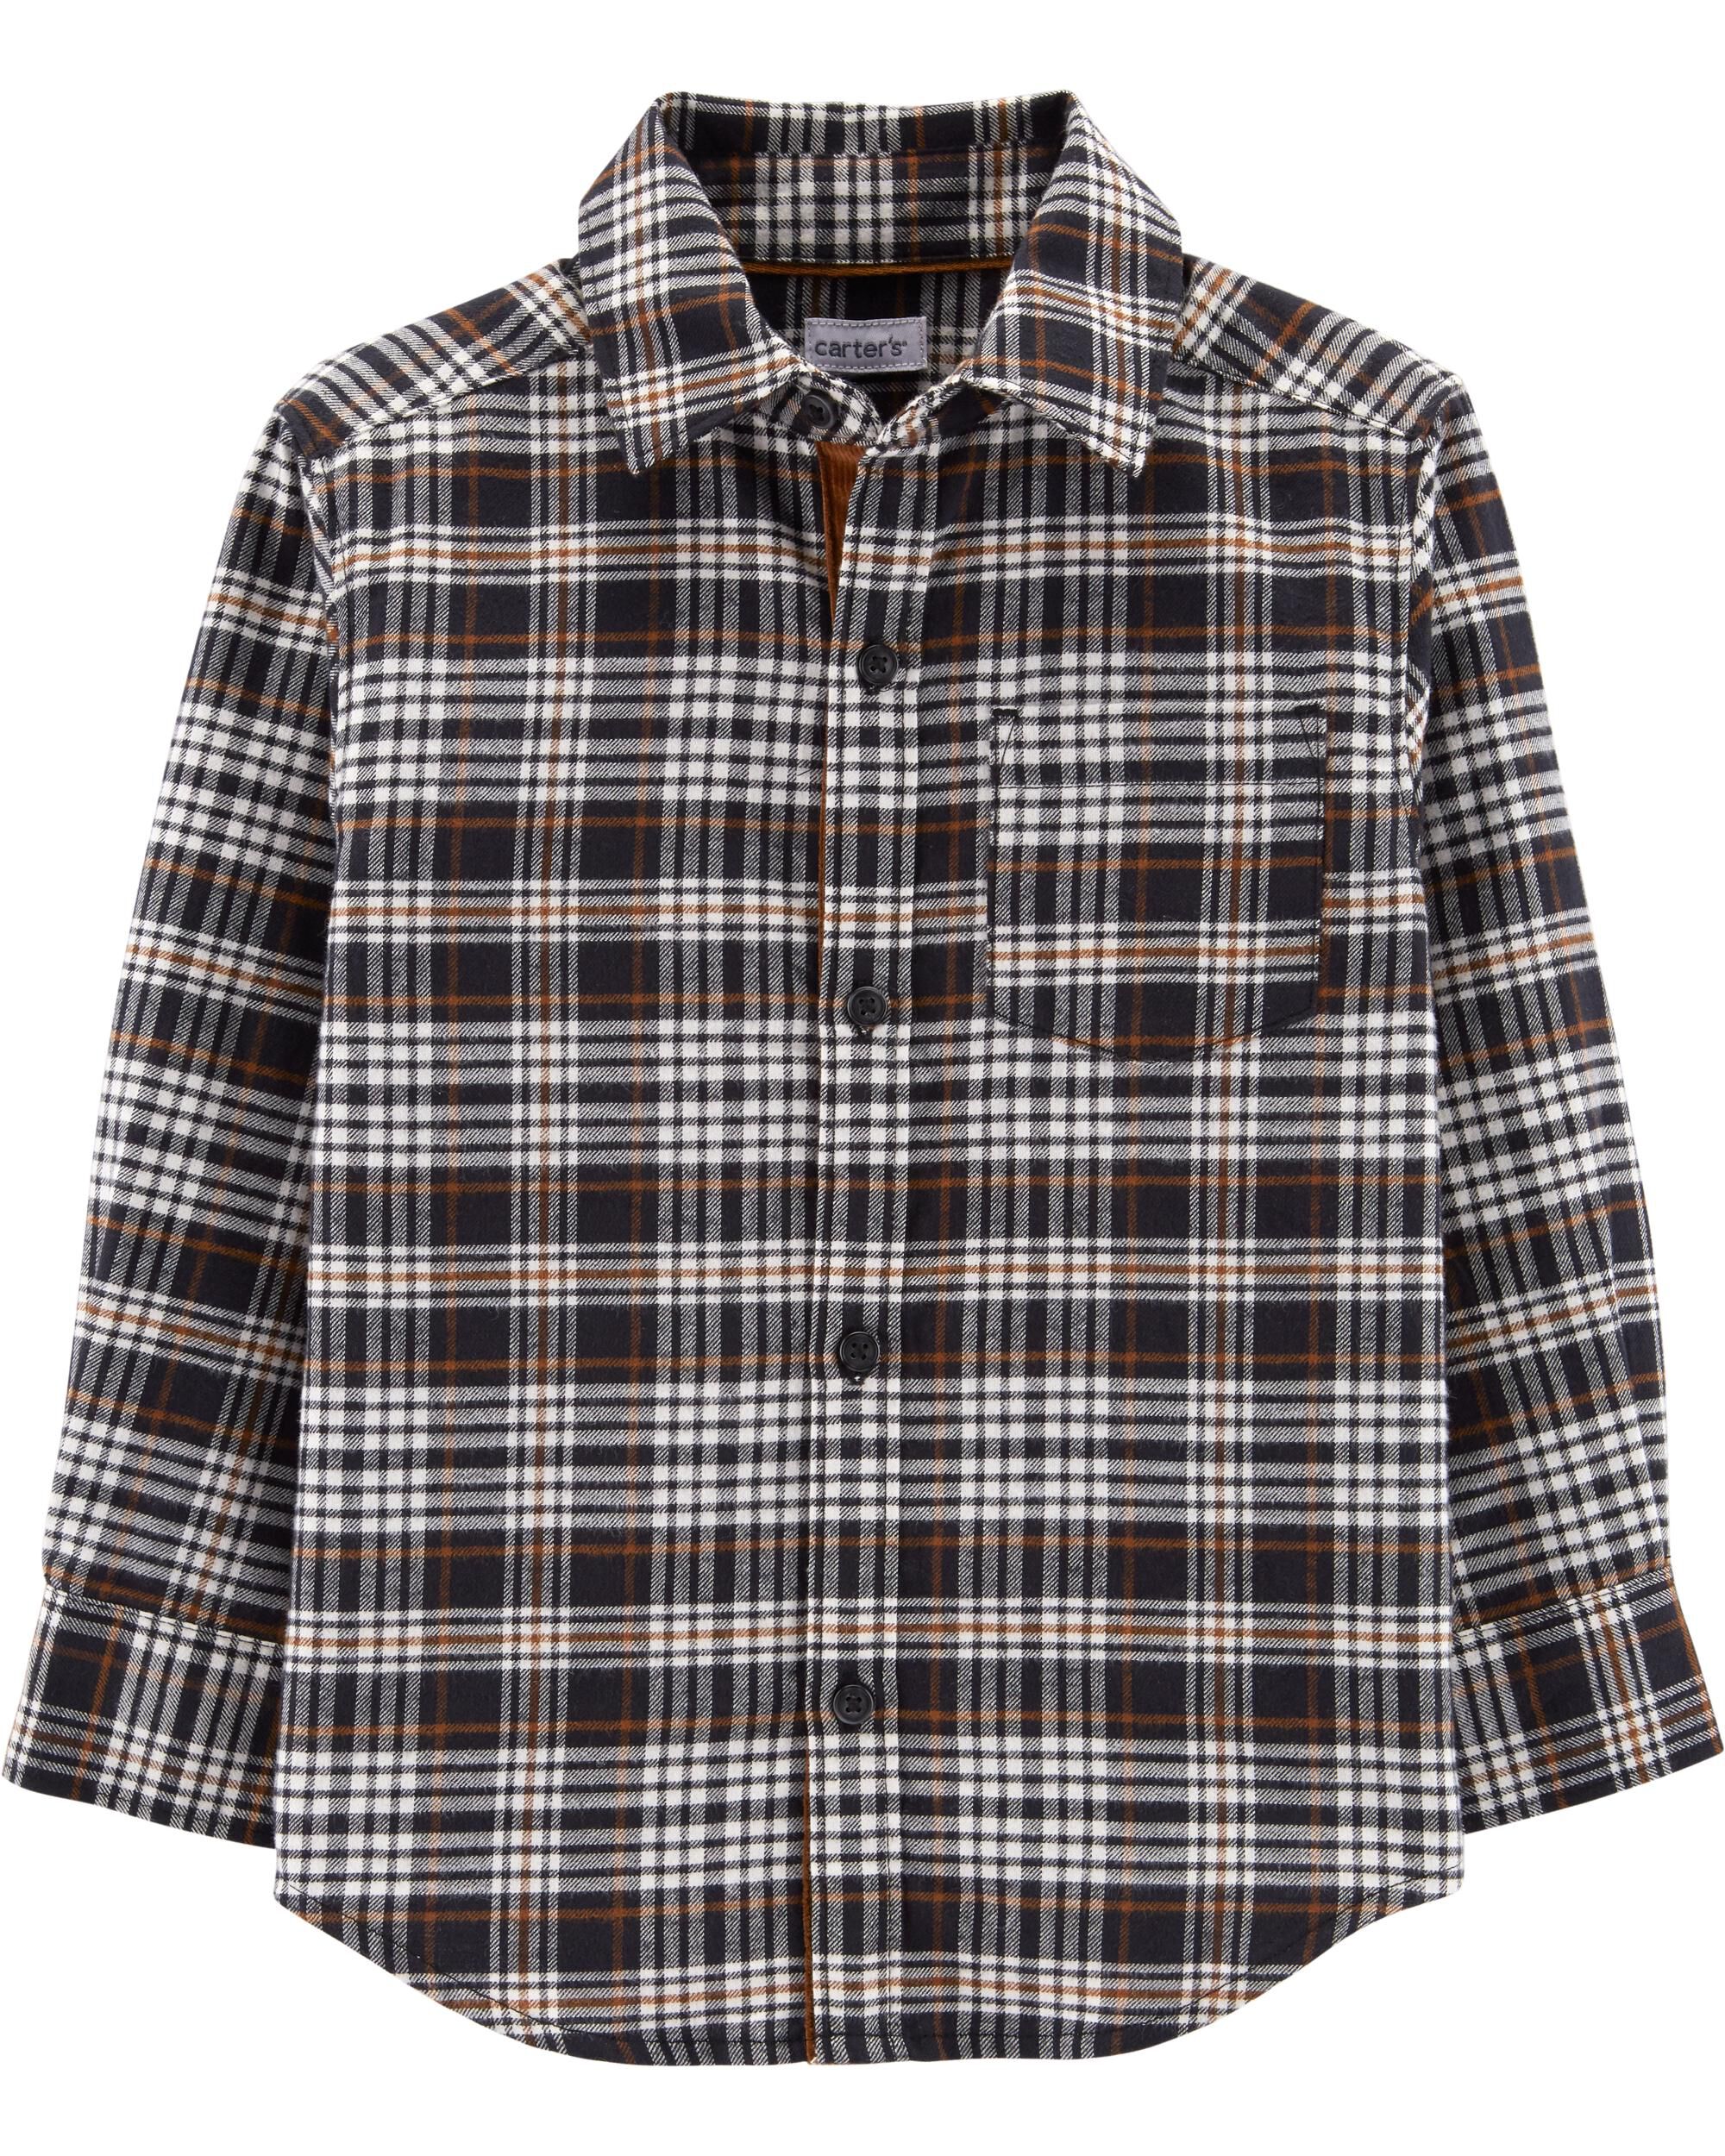 Carters Baby Boys Plaid Button-Front Shirt